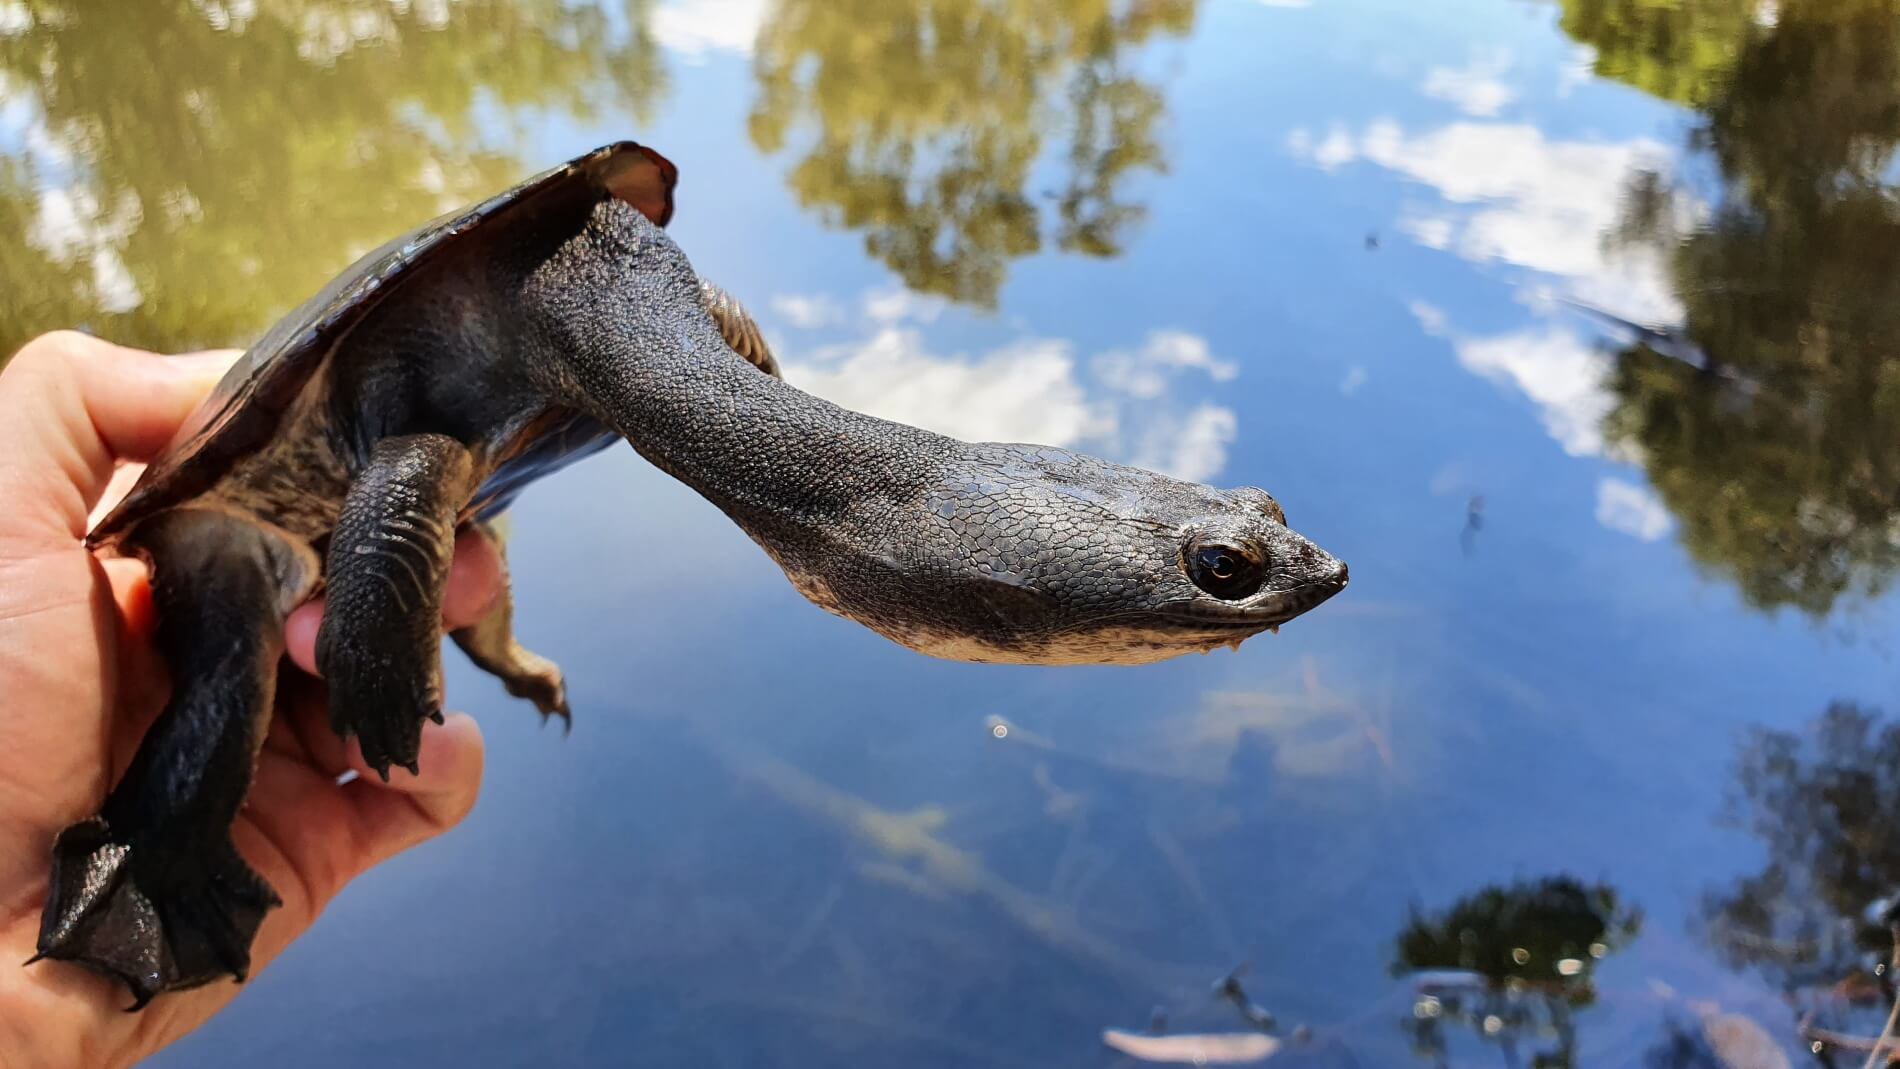 Close up of a snake necked turtle